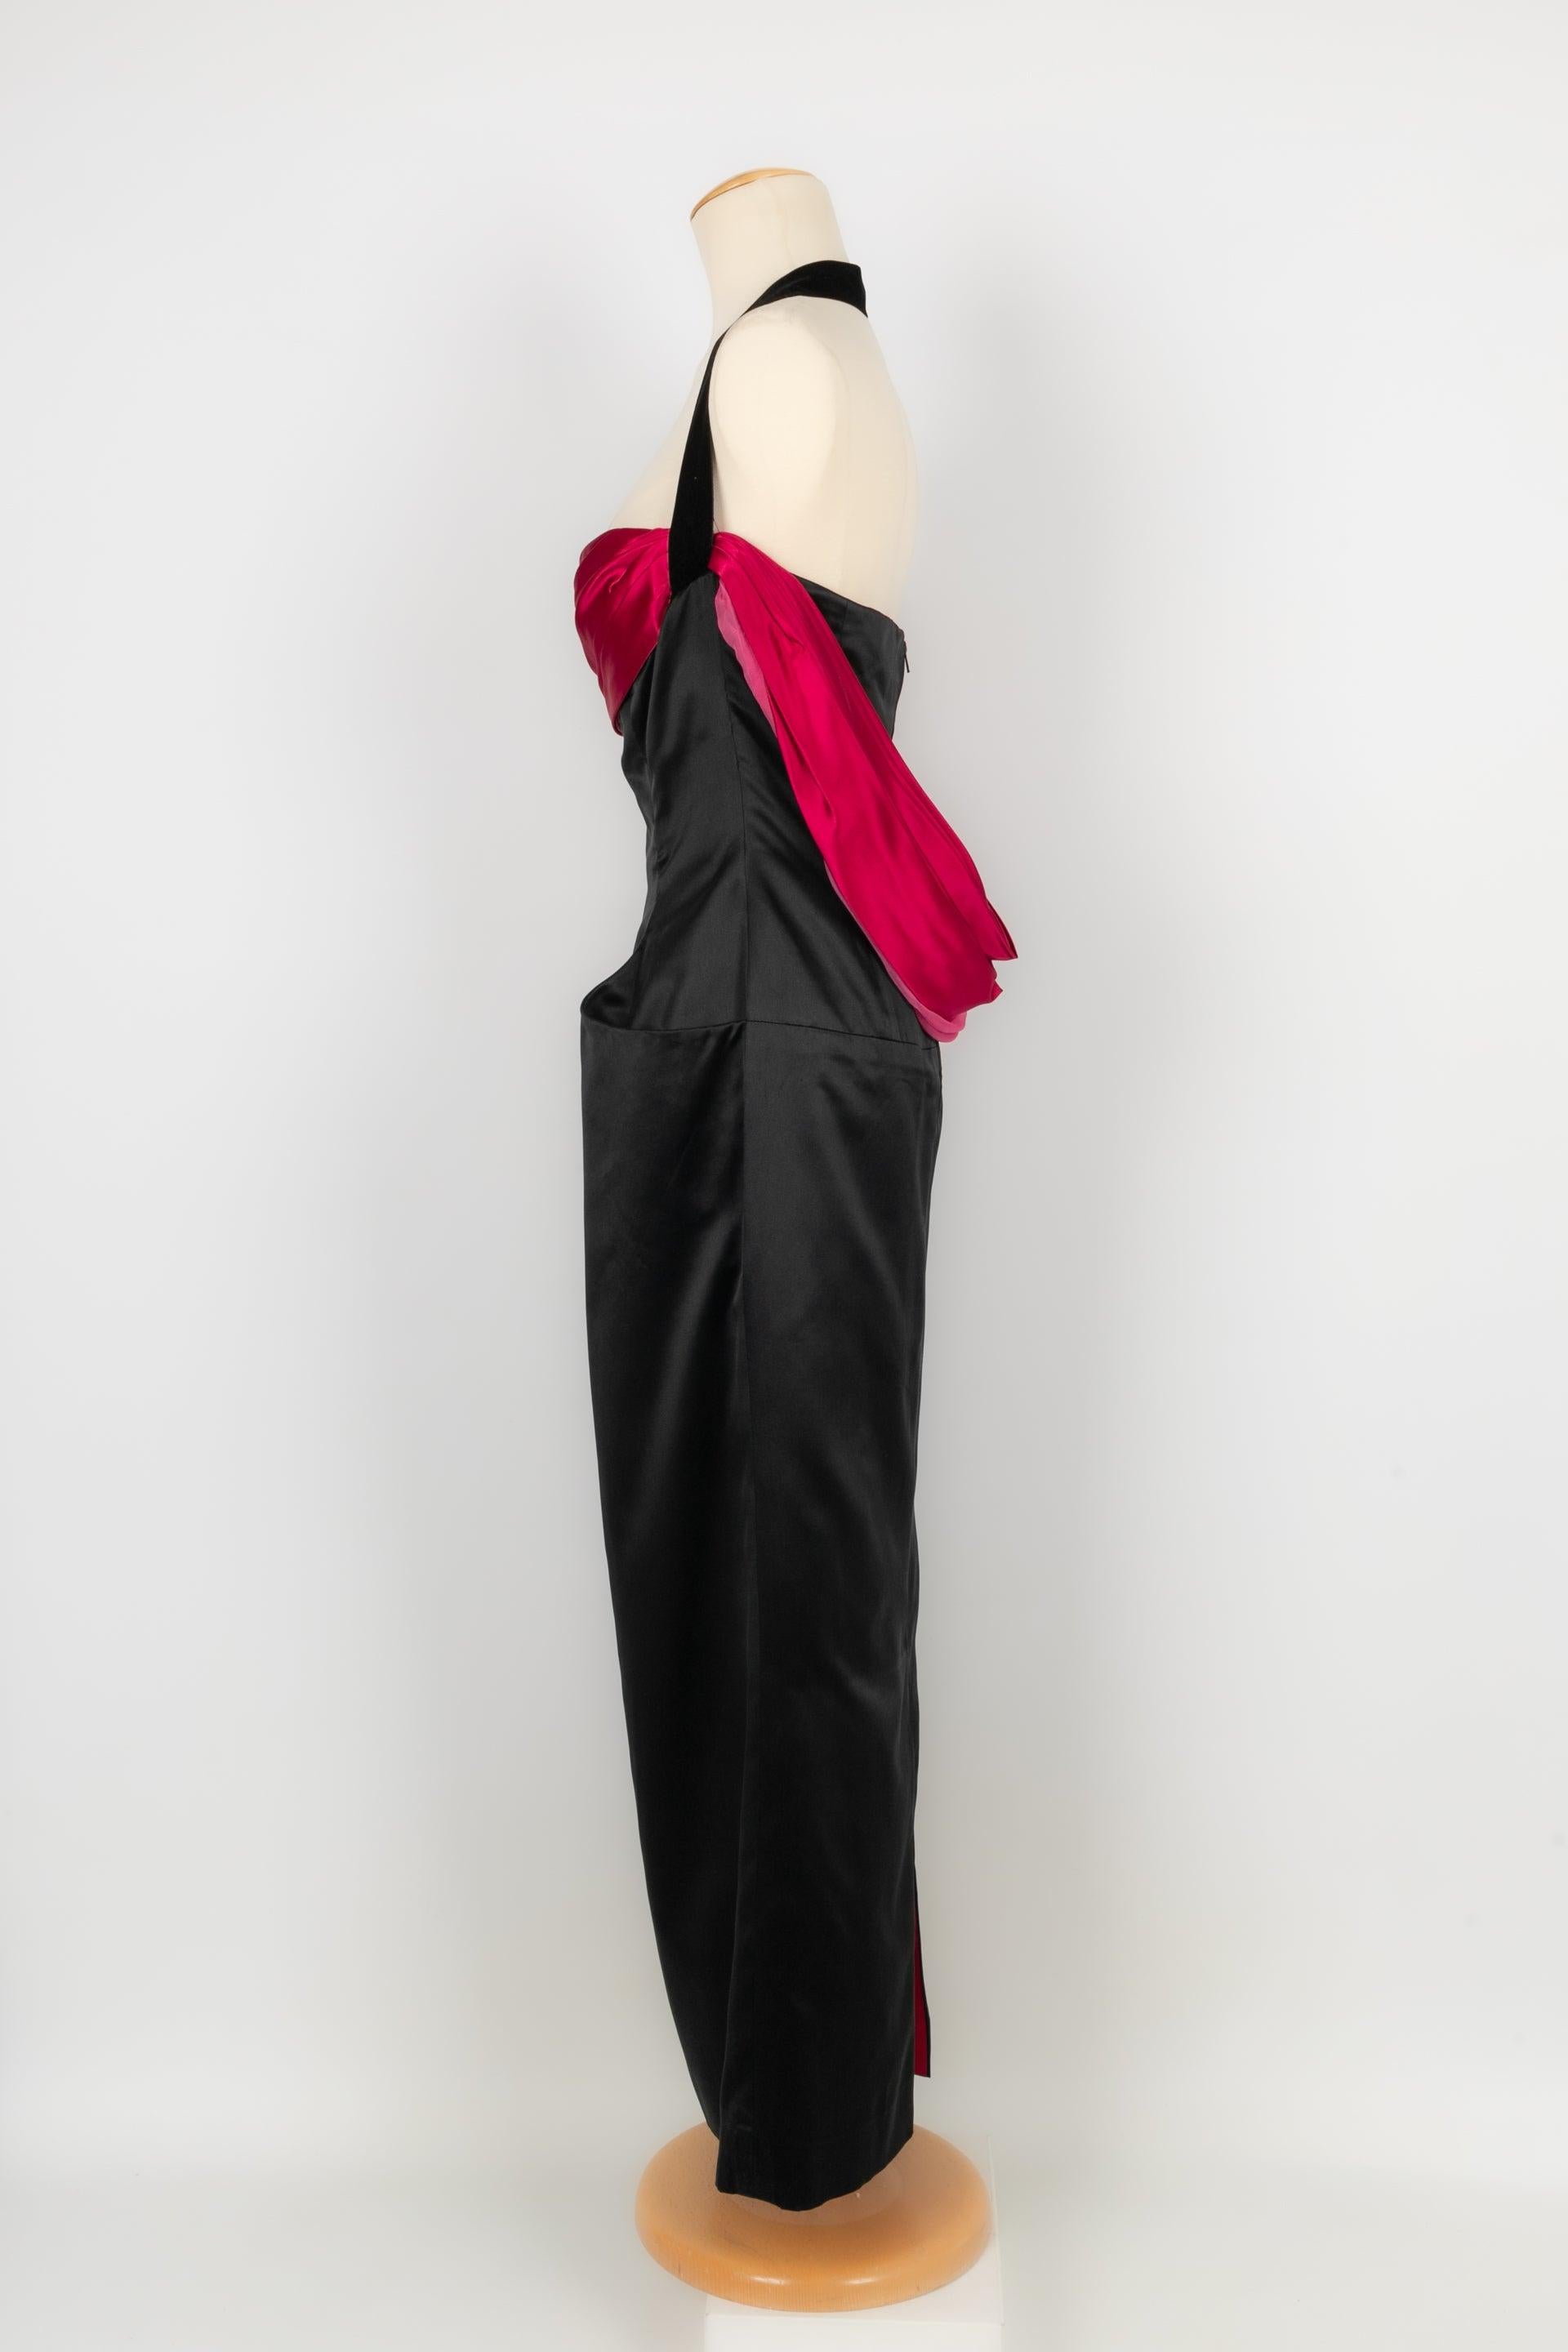 Women's Christian Dior Red and Black Silk Satin Long Dress For Sale